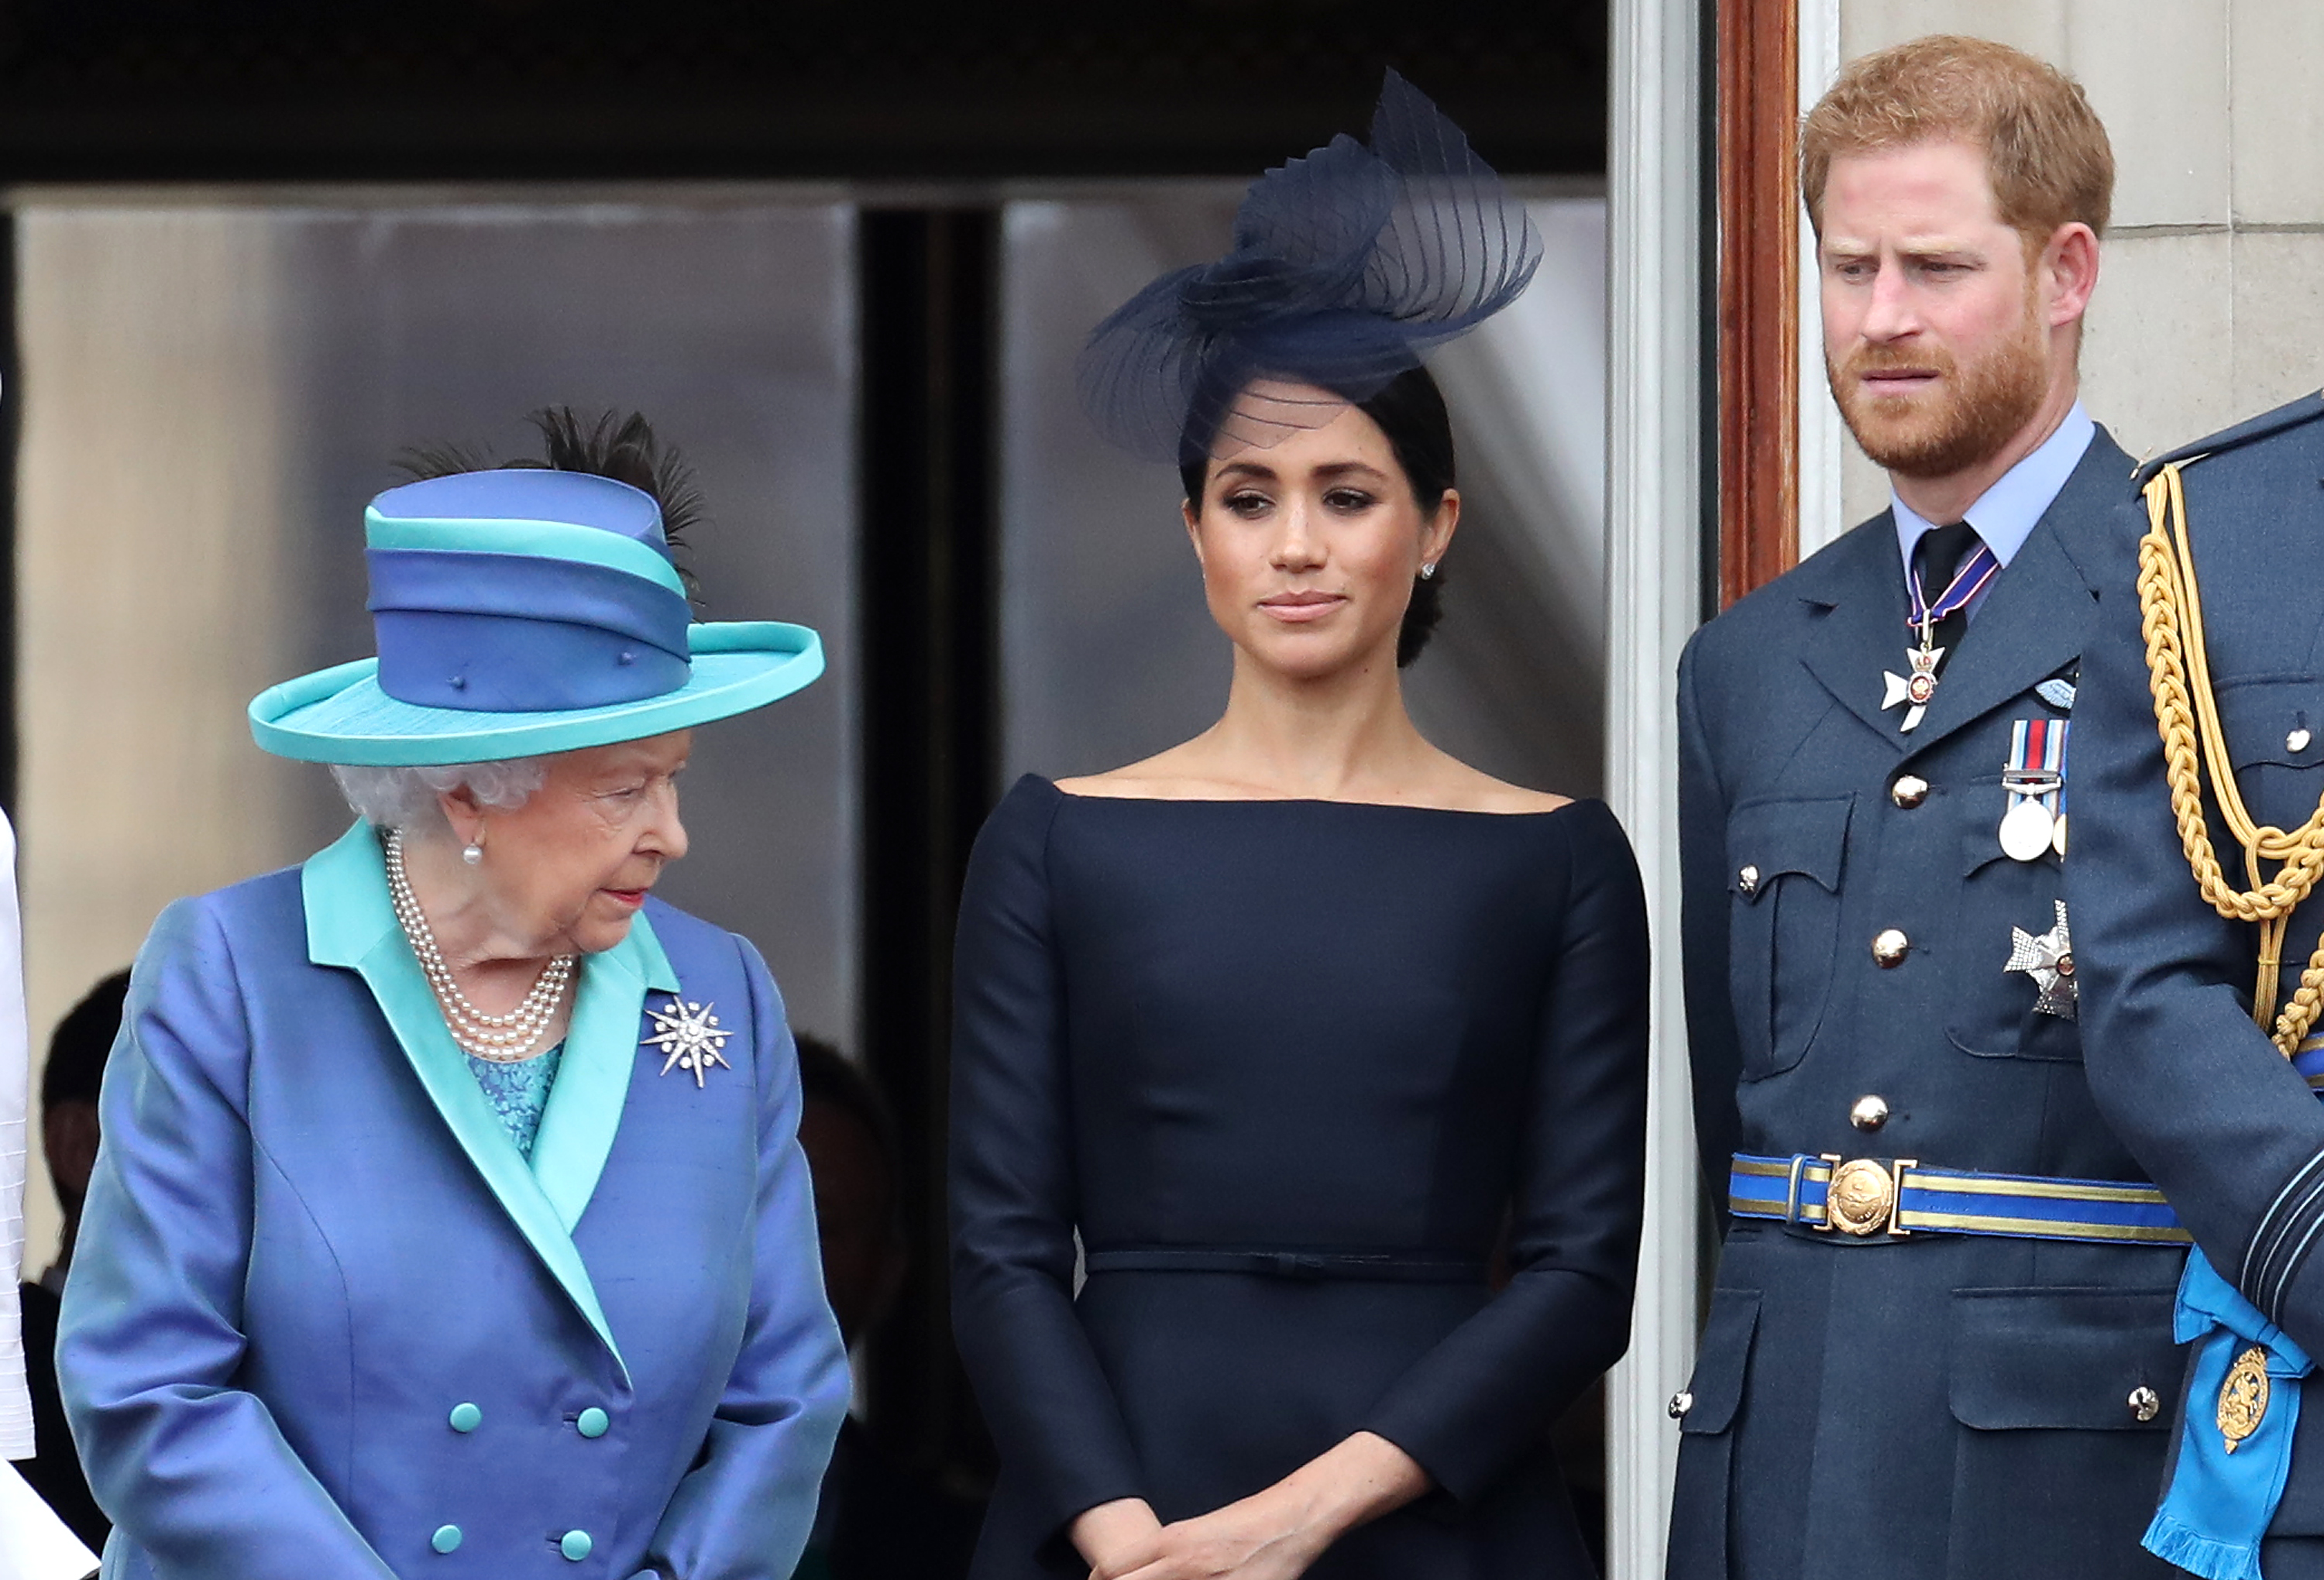 Queen Elizabeth II, Prince Harry, and Meghan Markle standing on the balcony of Buckingham Palace